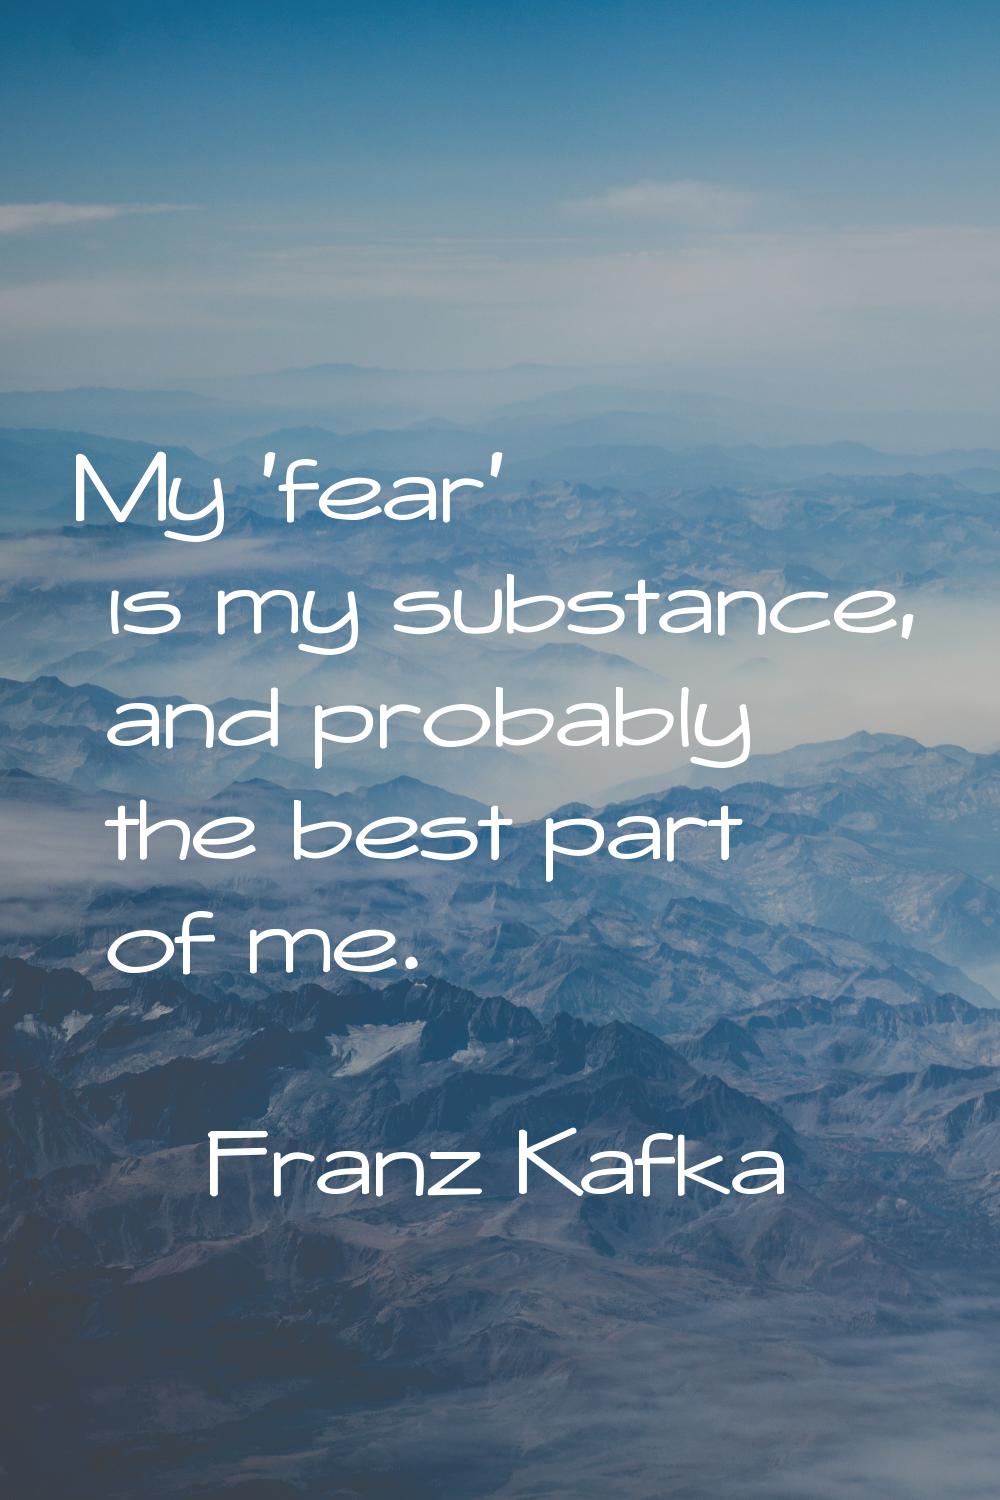 My 'fear' is my substance, and probably the best part of me.